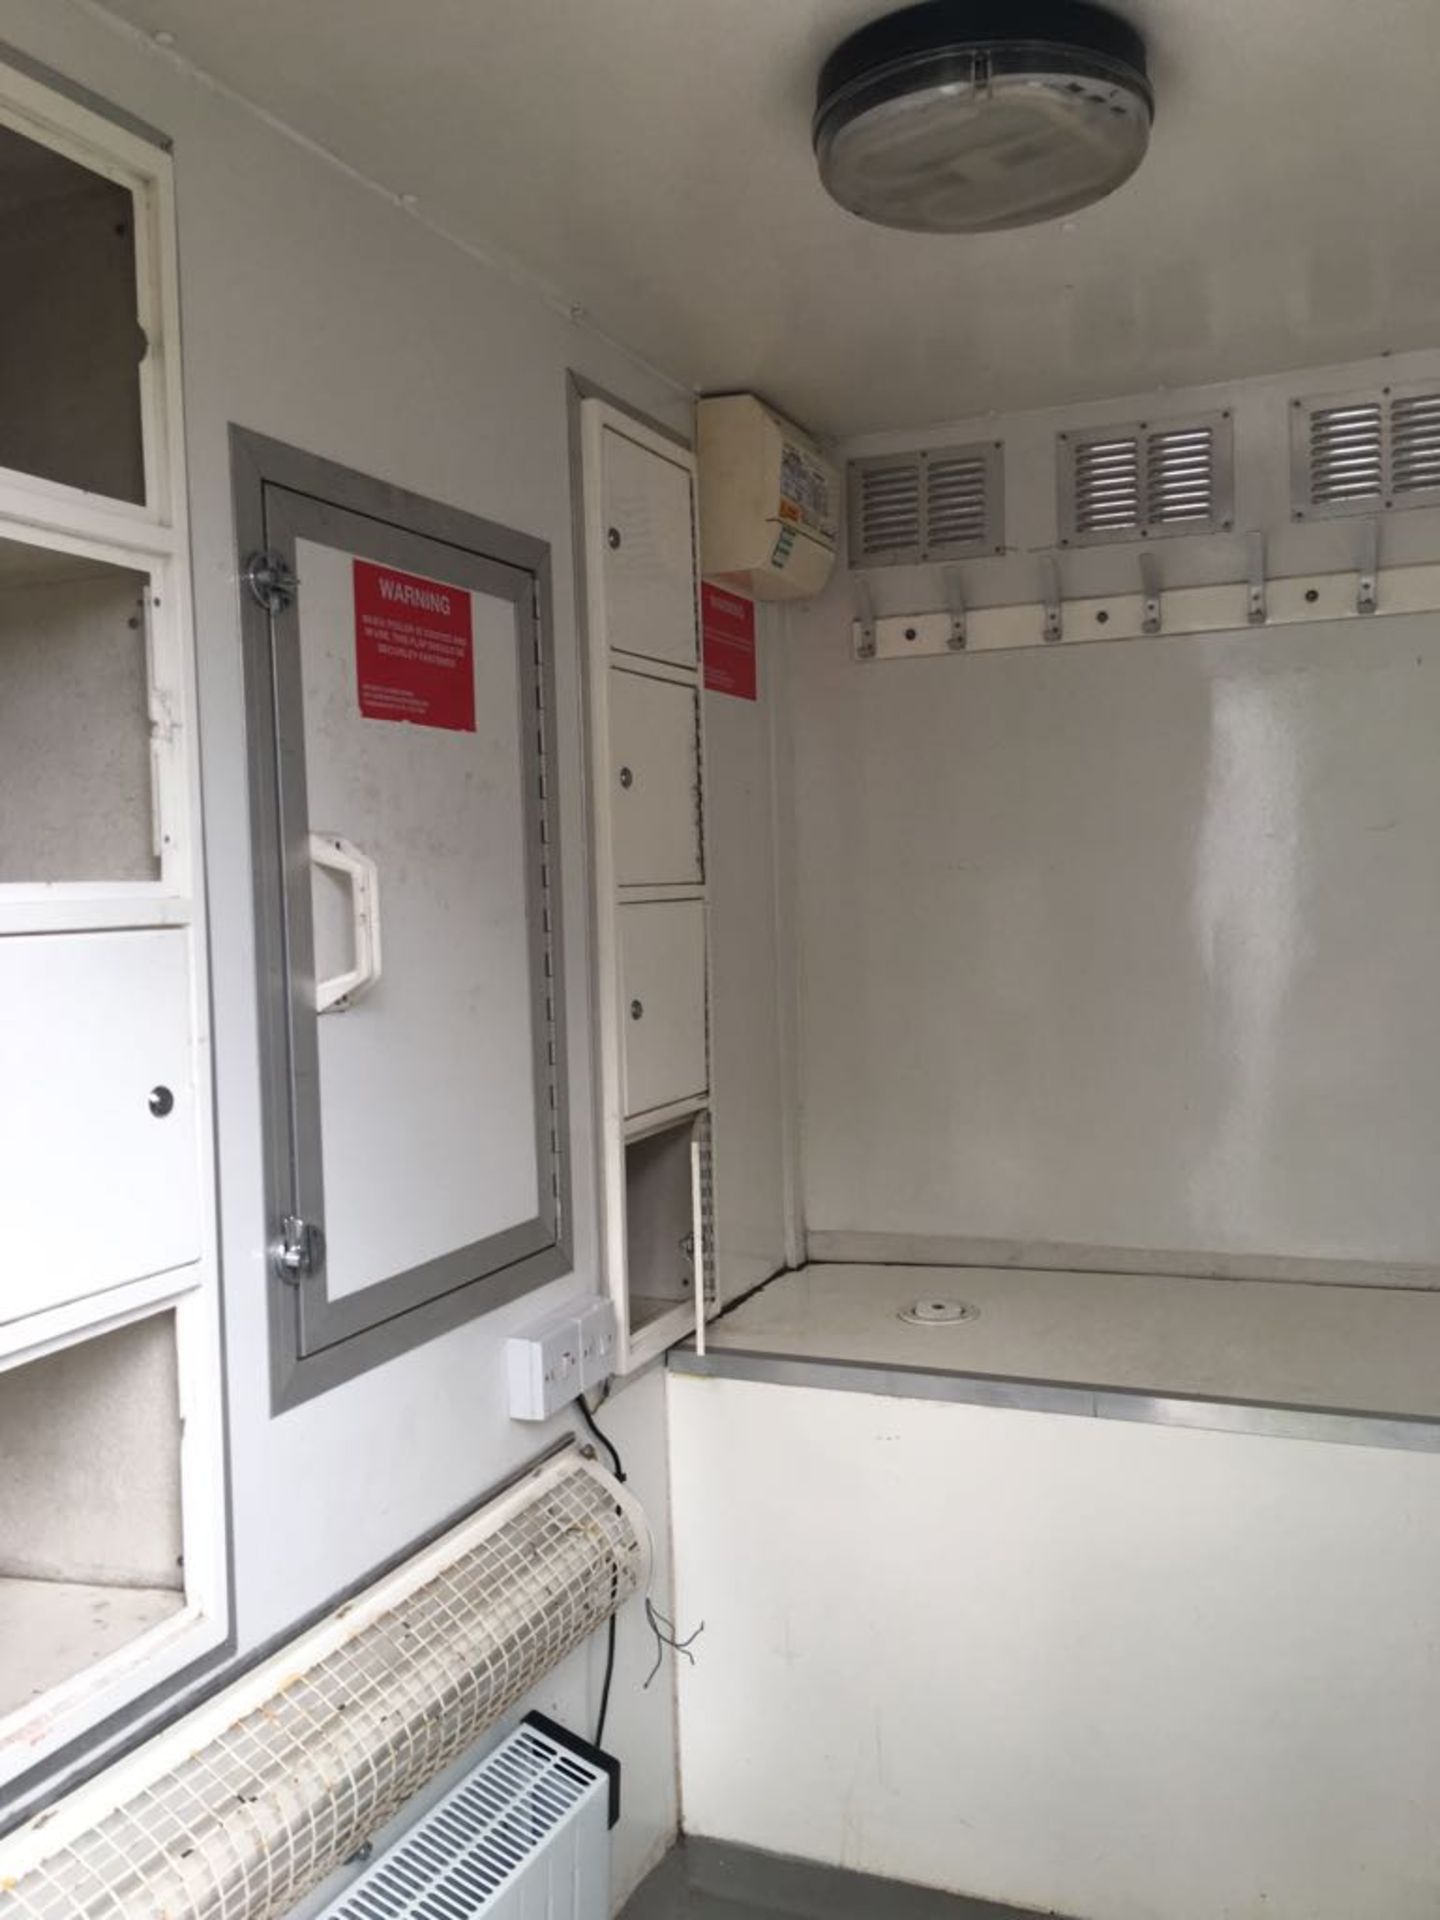 MOBILE TRAILER AMS TWIN SHOWER DECONTAMINATION UNIT AND CHANGING ROOMS - Image 13 of 27